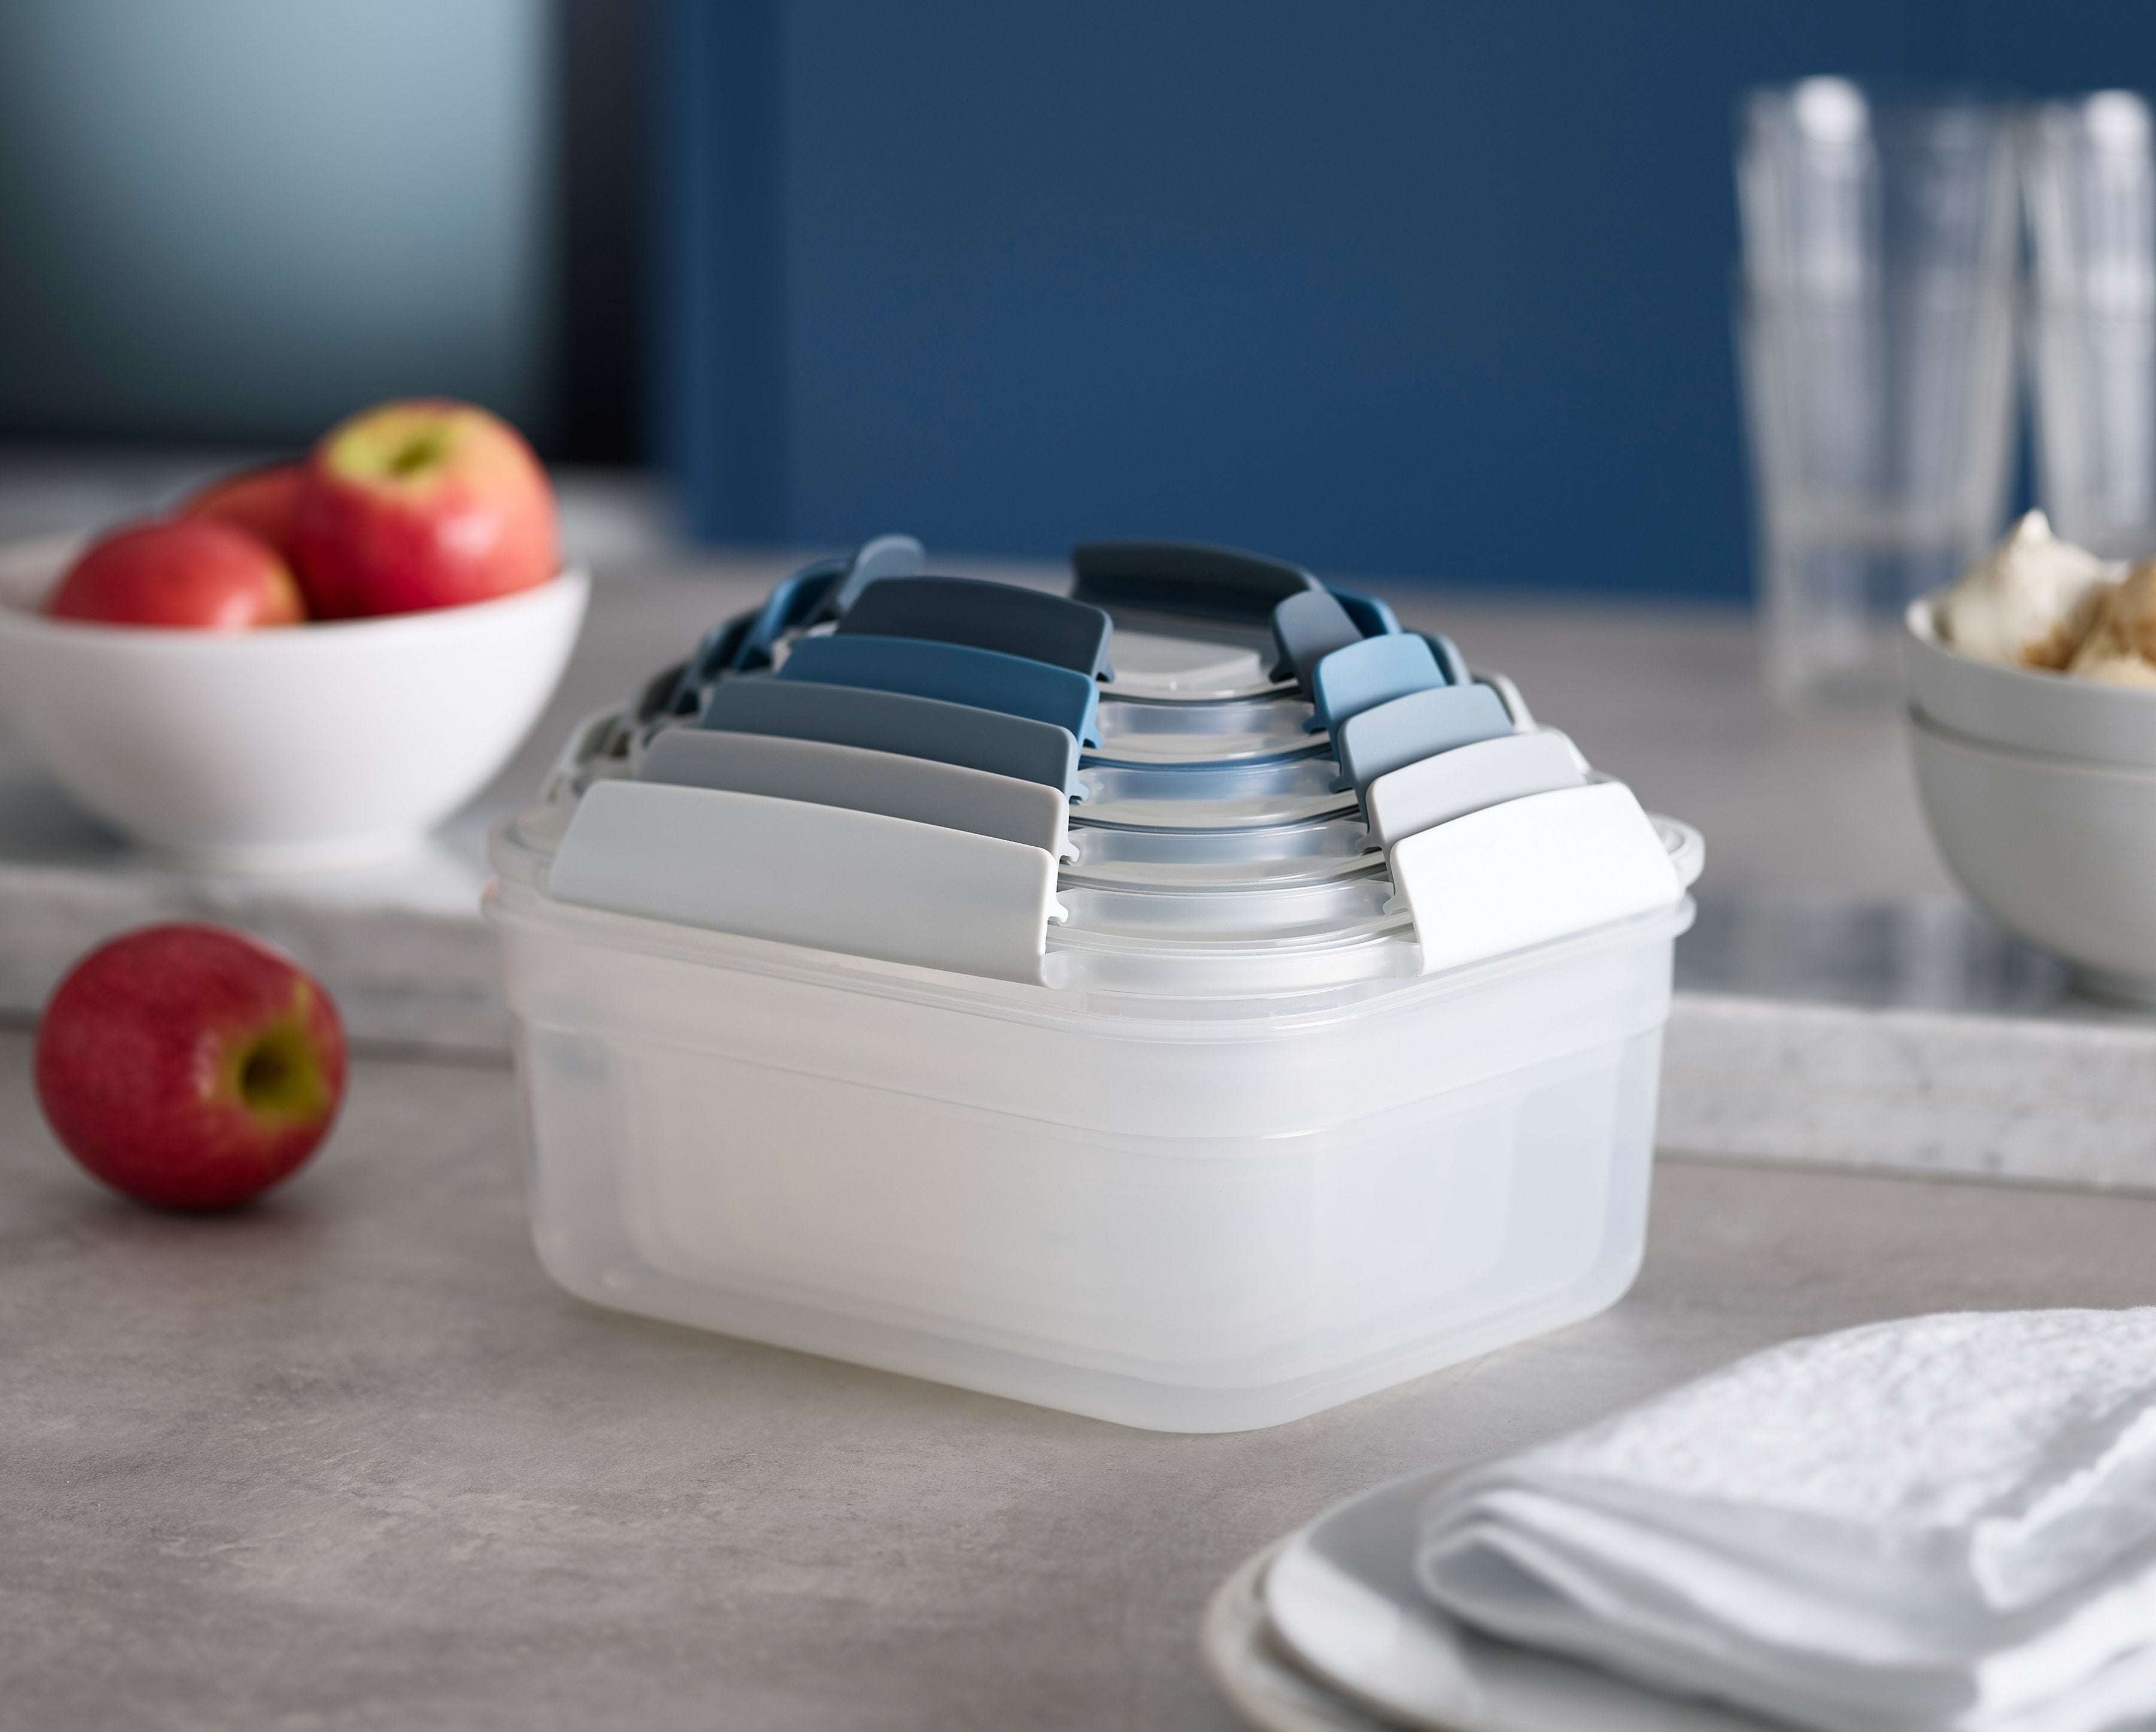 BEON.COM.AU  The unique design of these food storage containers means the bases nest neatly inside each other while the lids clip conveniently together for efficient, space-saving storage.  Space-saving, nesting design Easy-find, snap-together lids and colour-coded bases Airtight, leakproof and stackable lid... Joseph Joseph at BEON.COM.AU